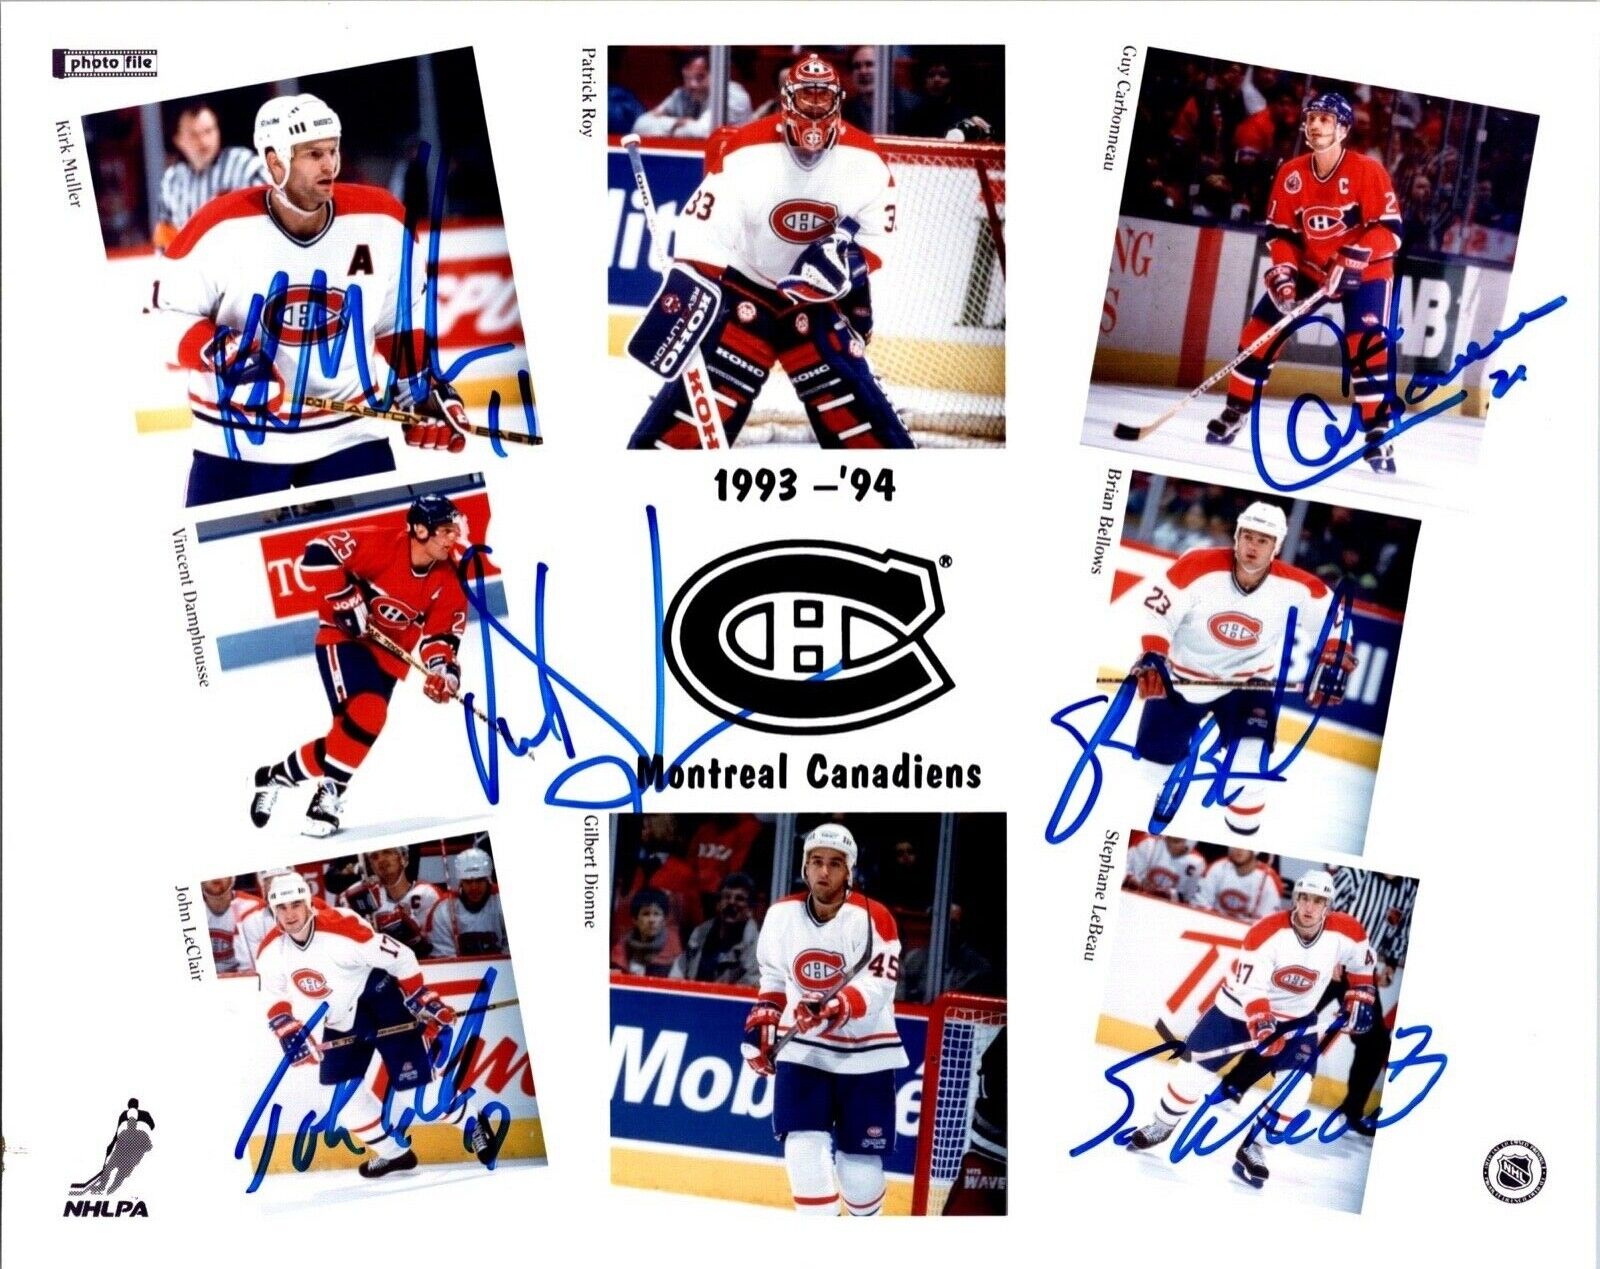 1993-94 Montreal Canadiens Autographed 8x10 Photo Certified by All Sports